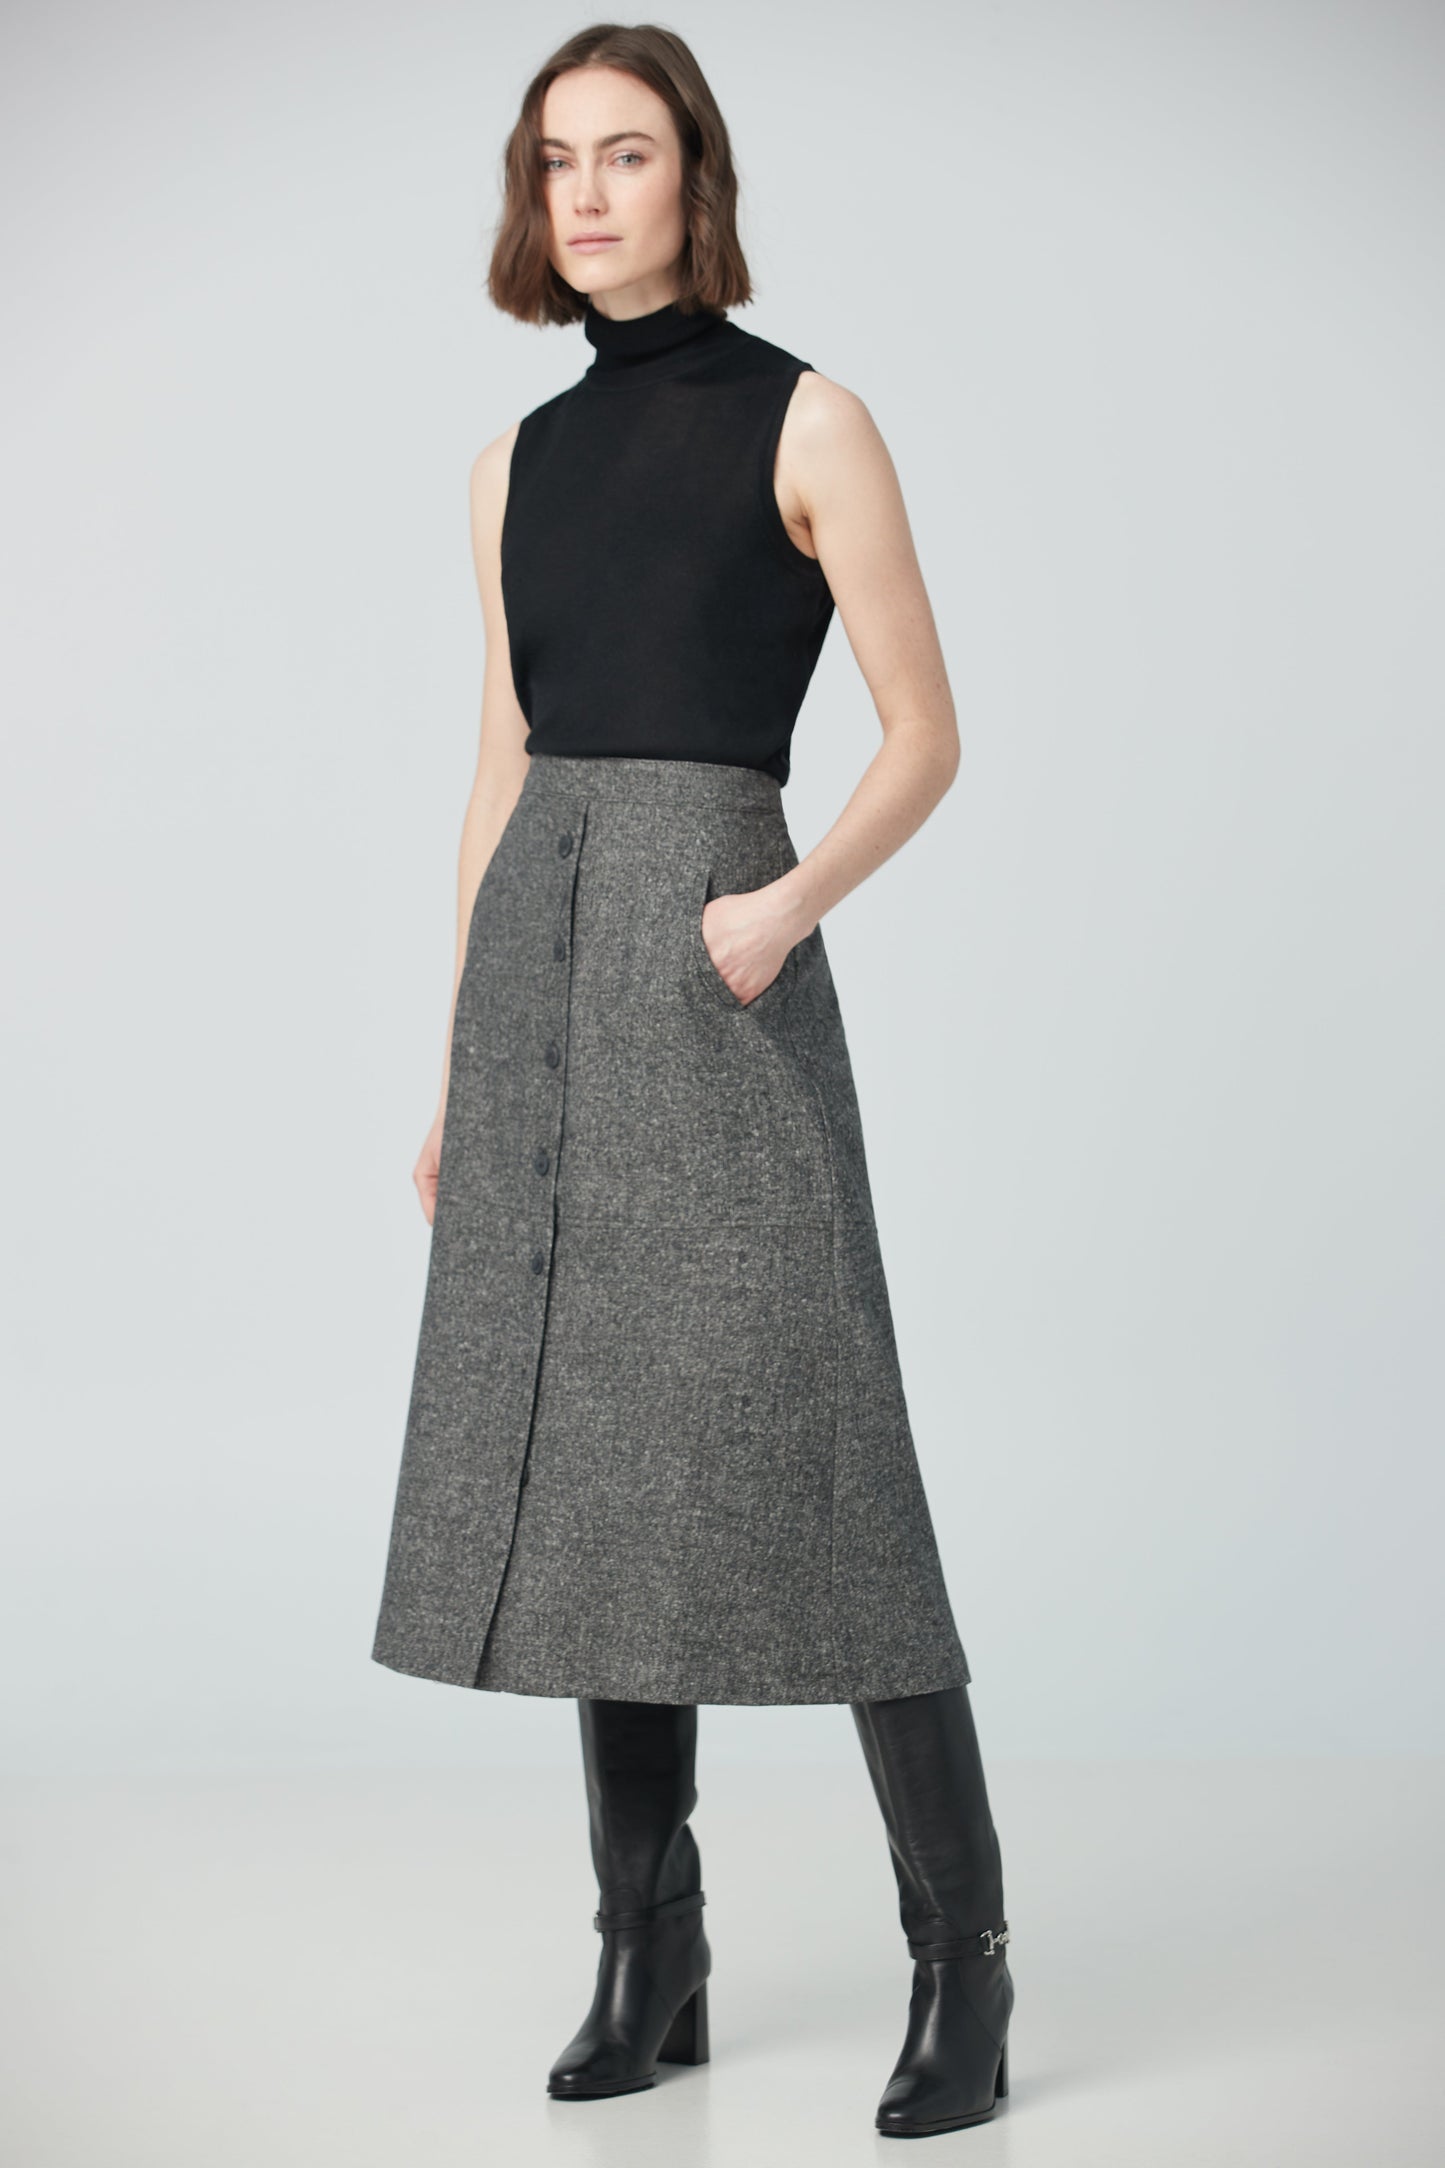 A-line skirt with buttons